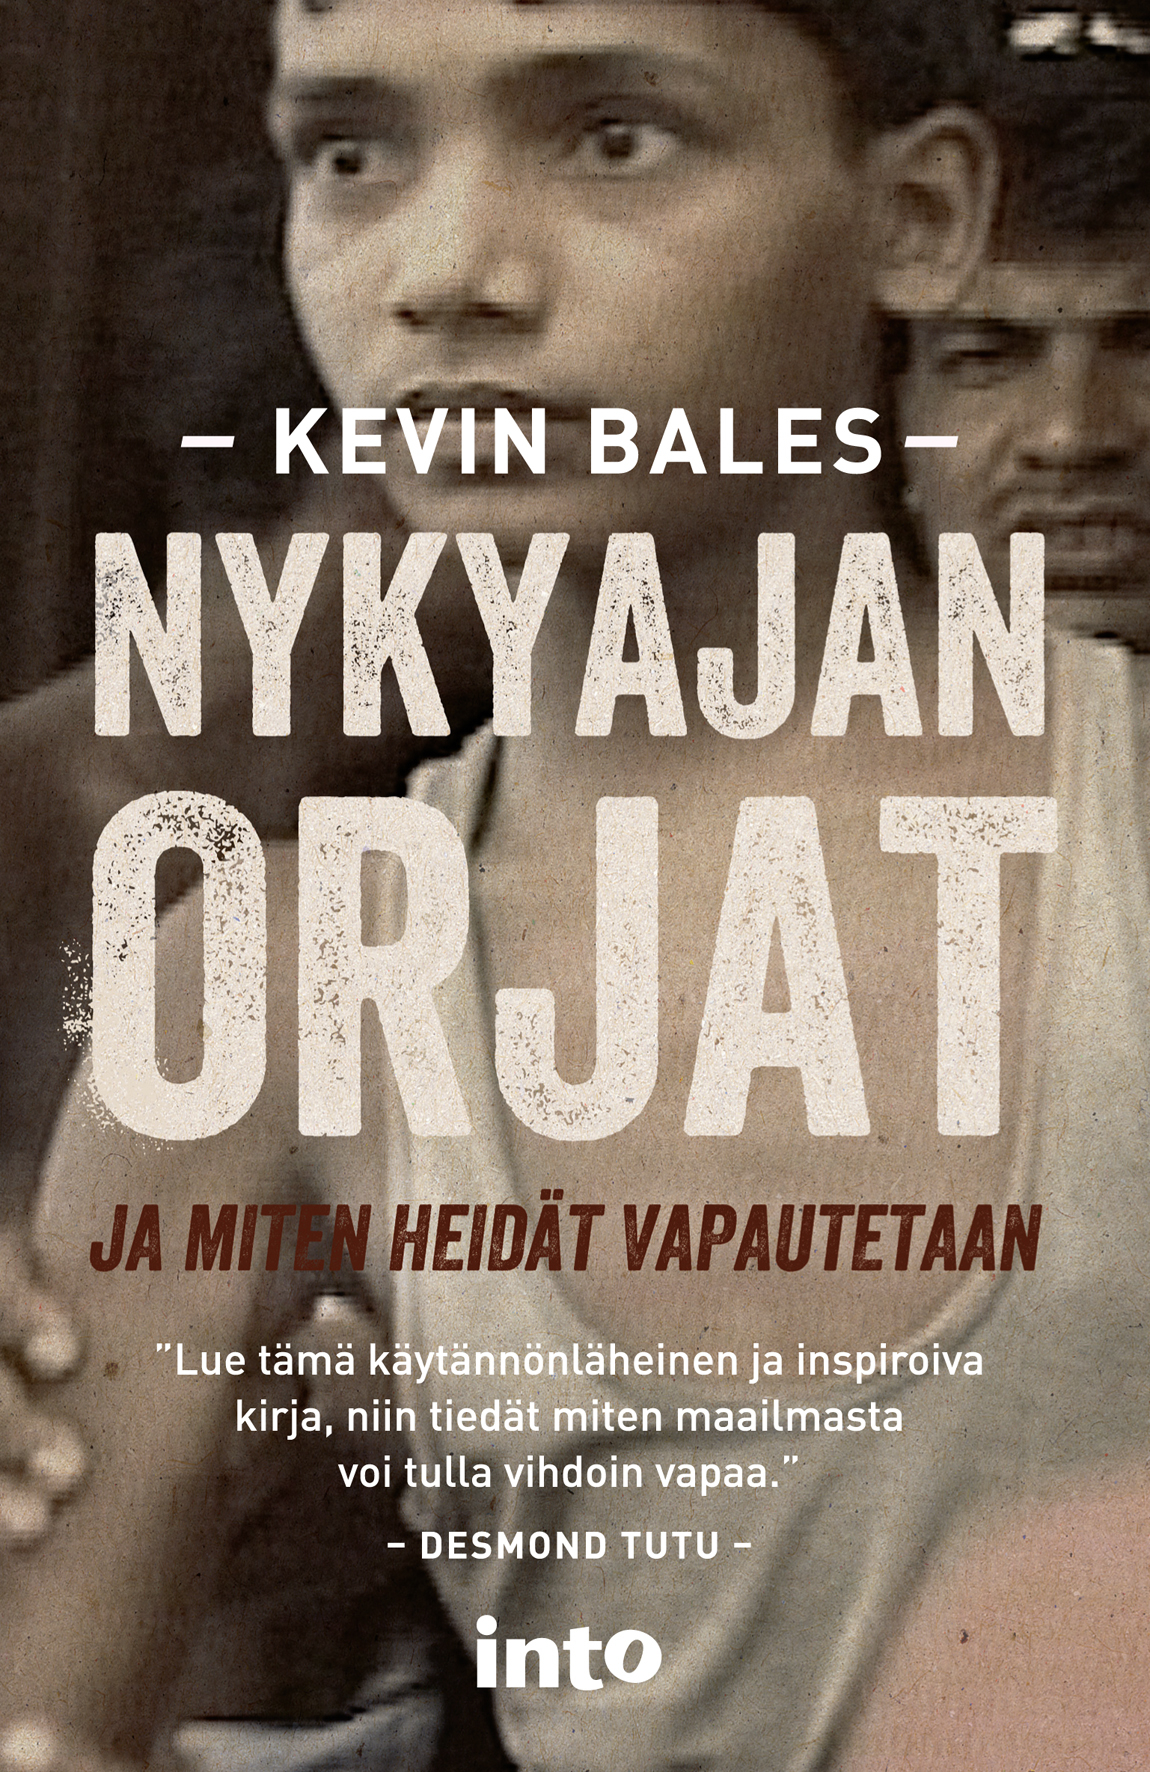 Ending Slavery Book Now Available in Finnish